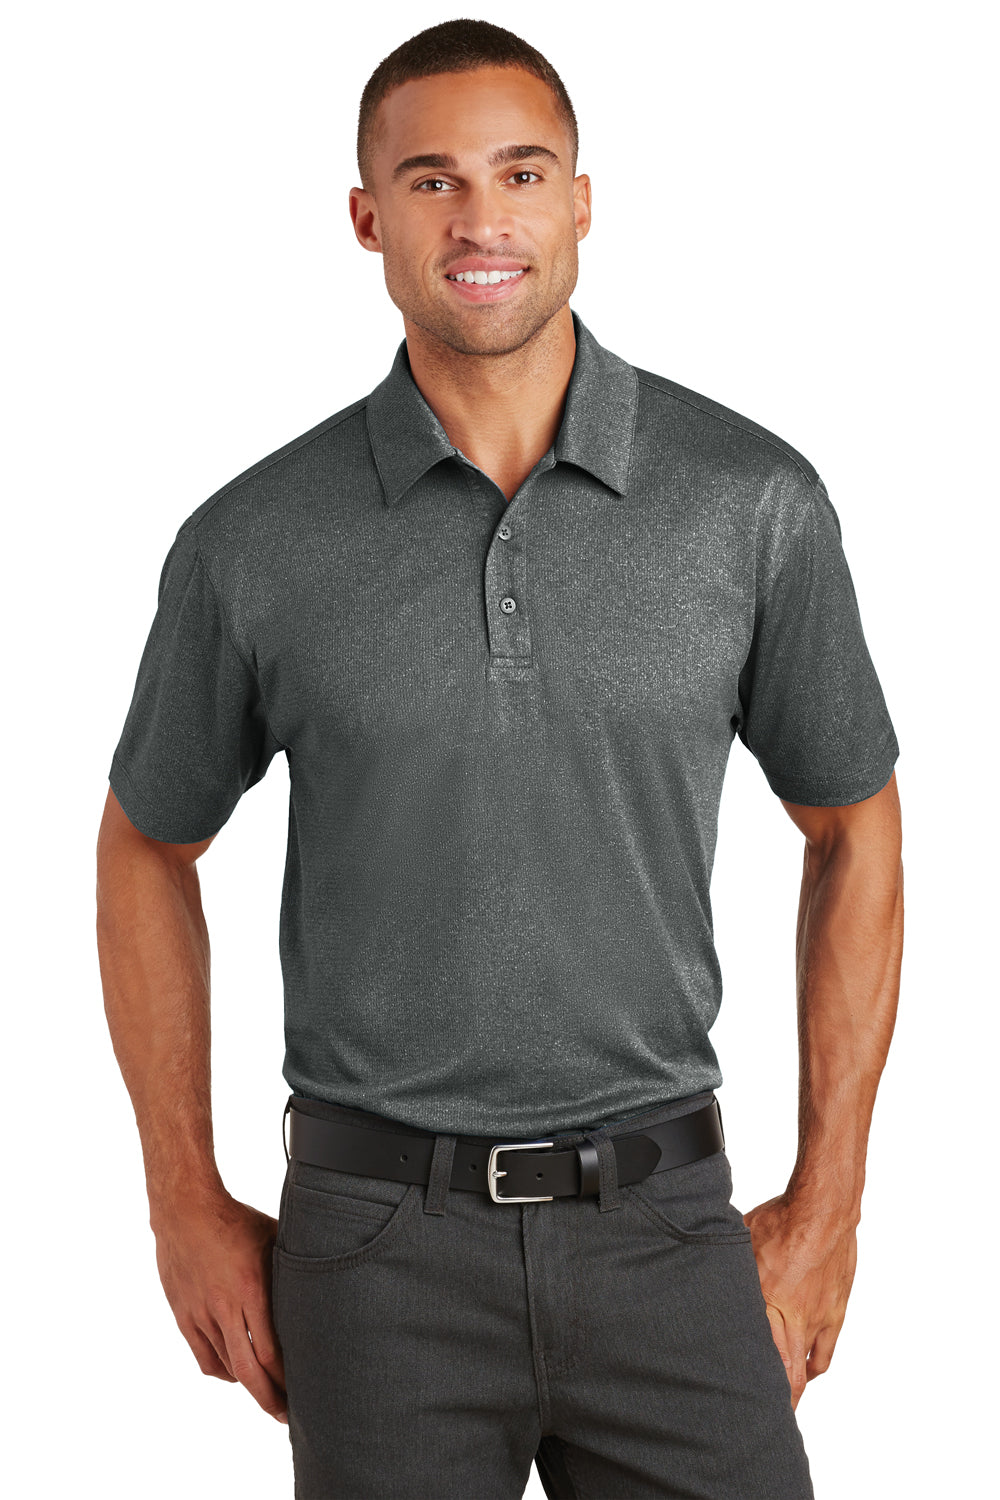 Port Authority K576 Mens Trace Moisture Wicking Short Sleeve Polo Shirt Heather Charcoal Grey Front